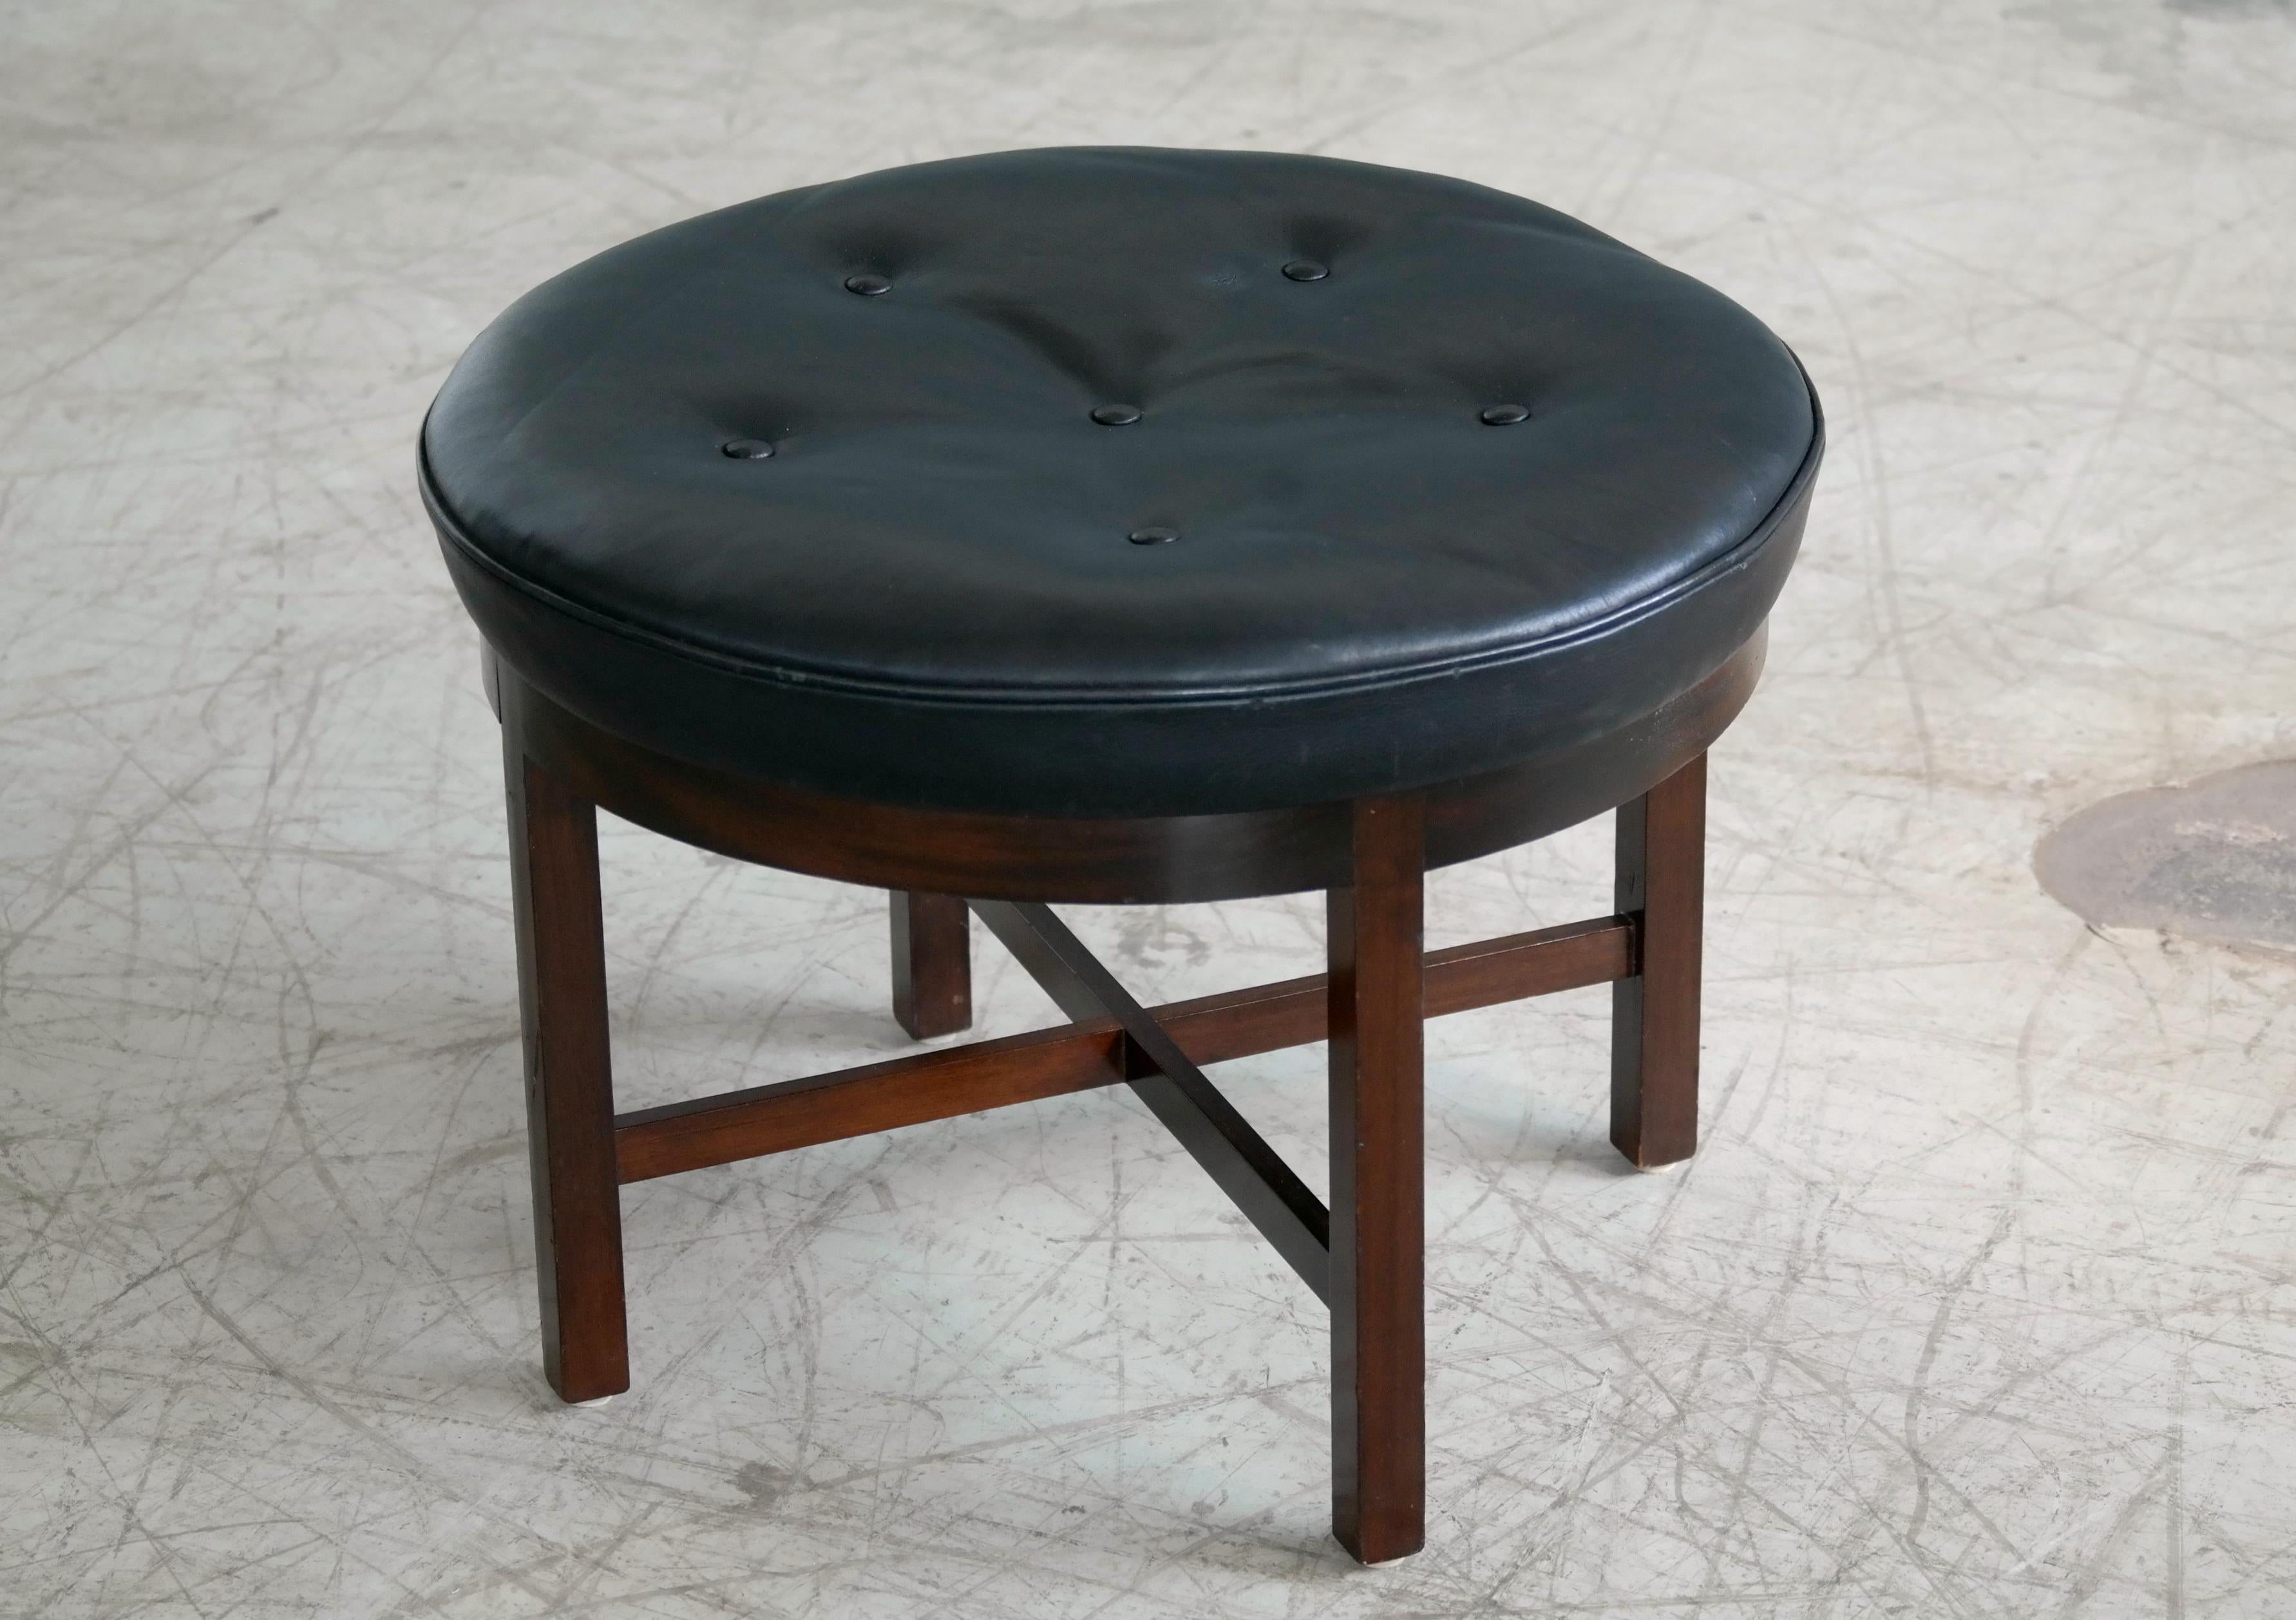 Beautiful 1950s ottoman or footstool from master furniture and cabinet maker Georg Kofoed. Round frame manufactured in mahogany and topped with a handstitched cushion in plush black leather. A great Danish midcentury high-end design that could be